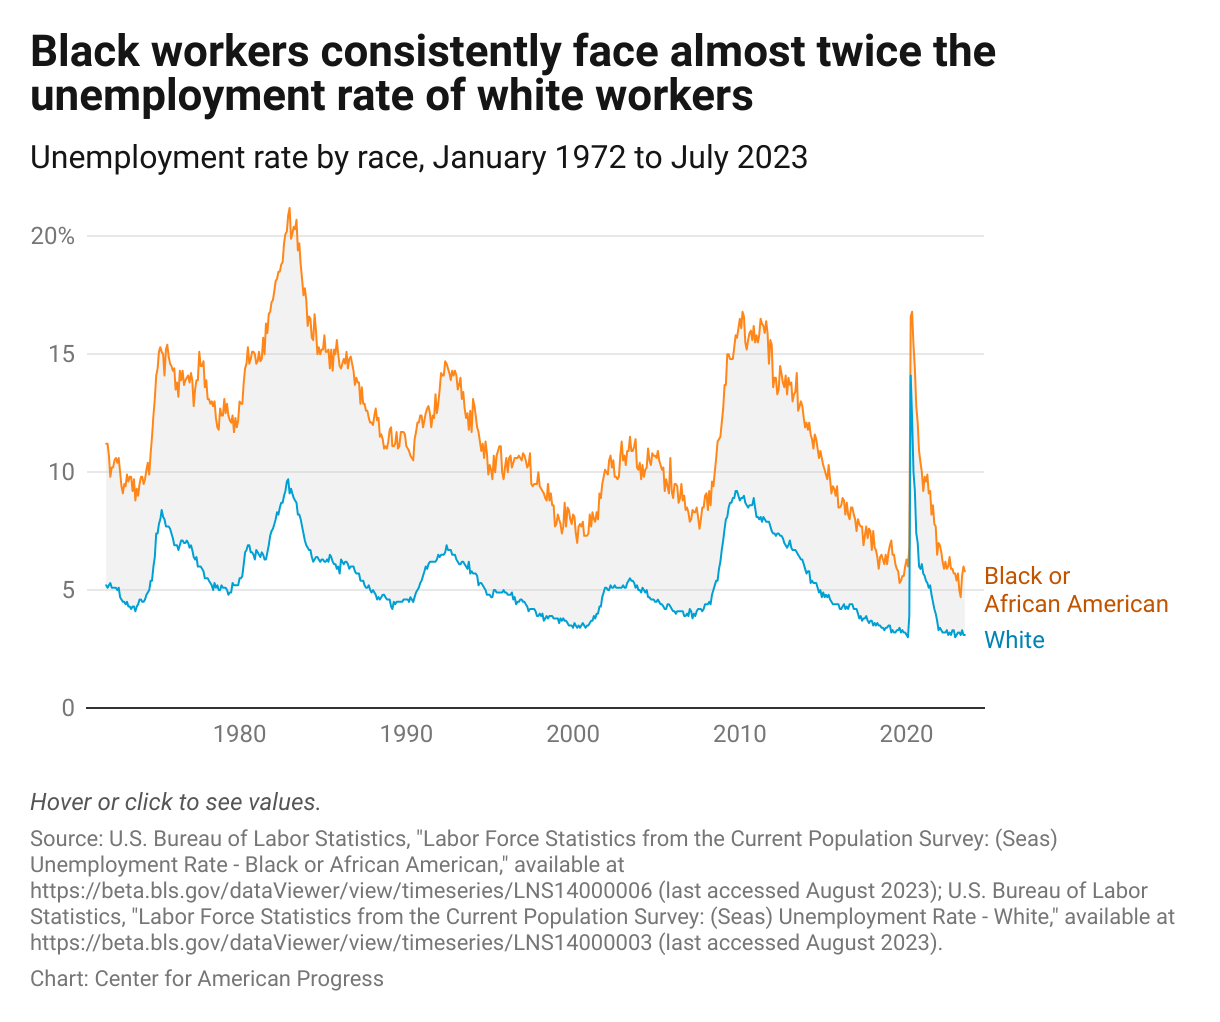 Line series showing that there is a long-standing and persistent employment gap between Black and white individuals.